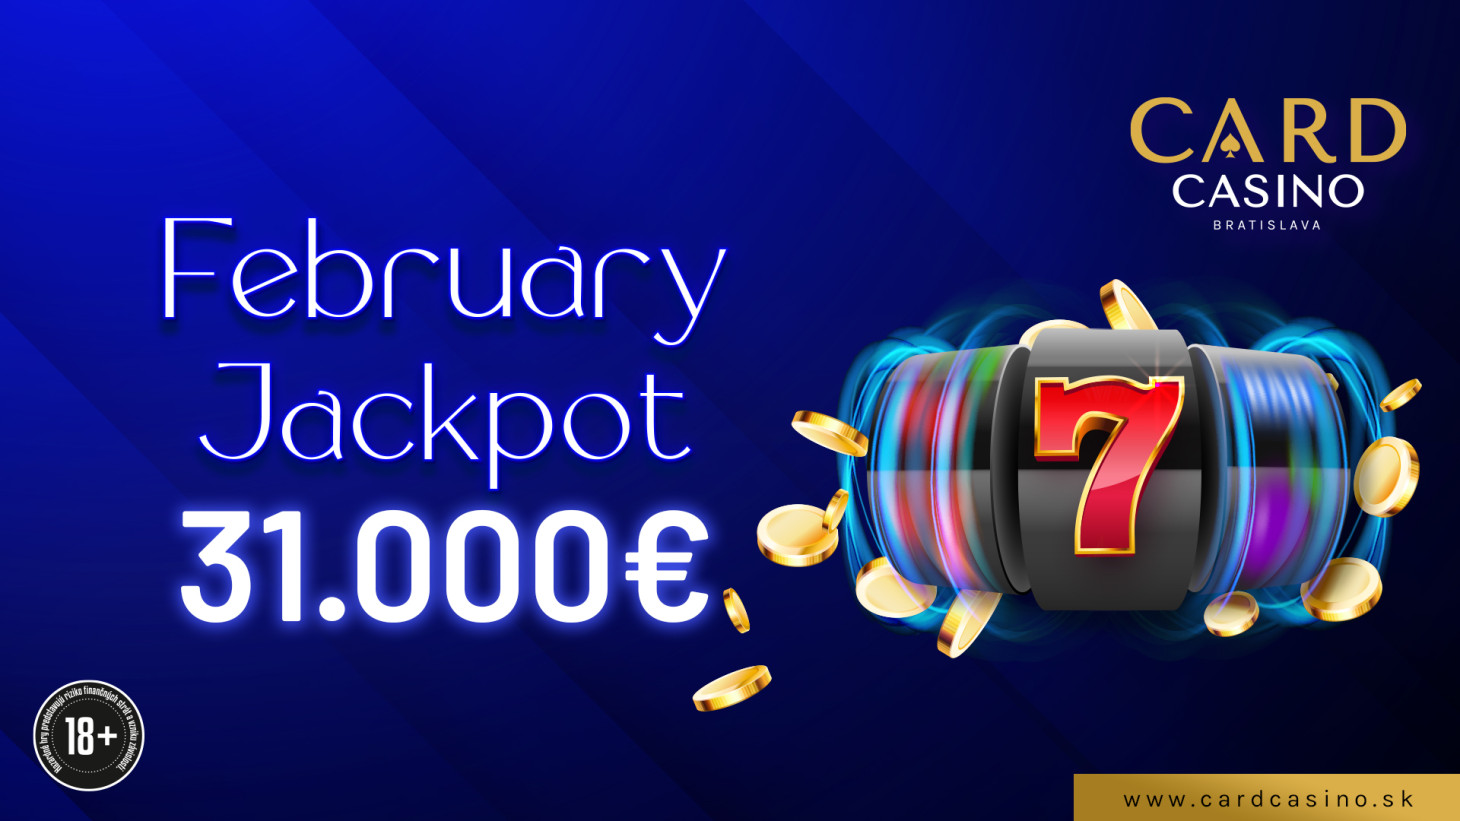 Come and claim your share of the February Jackpot worth €31,000